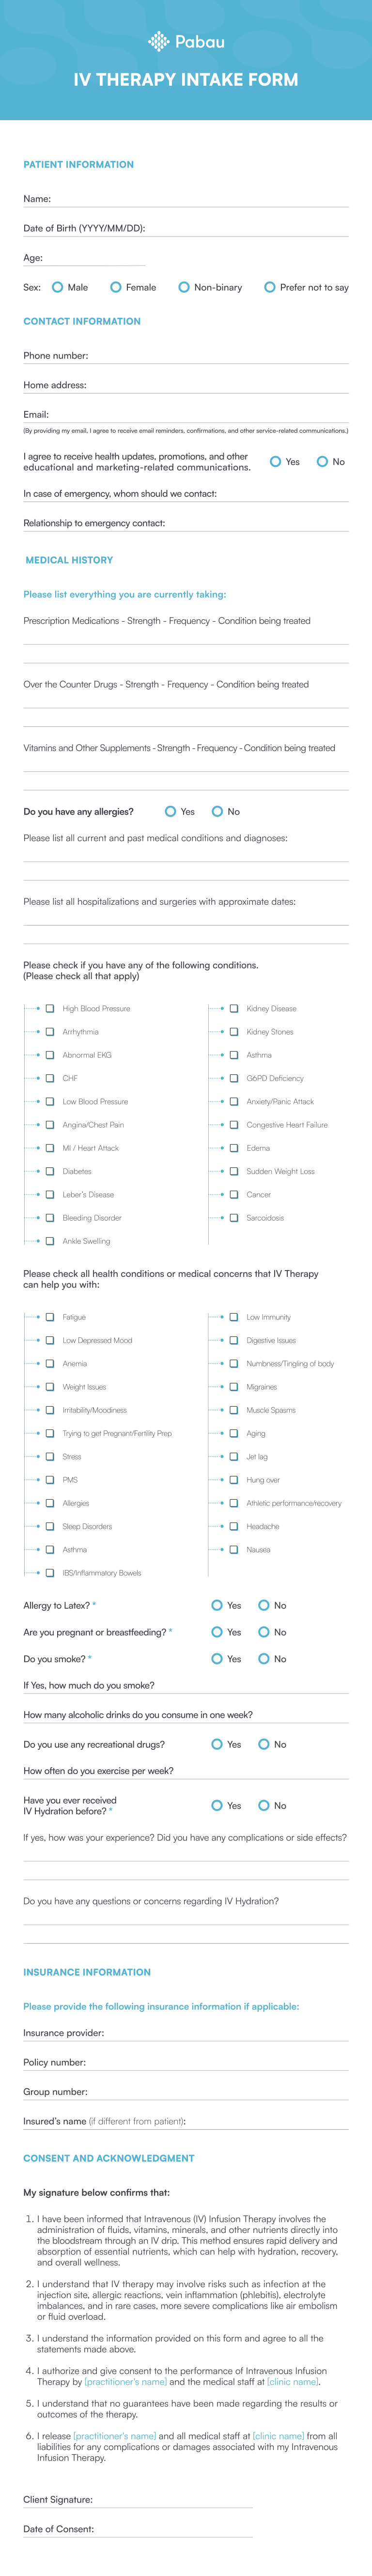 IV therapy intake form template